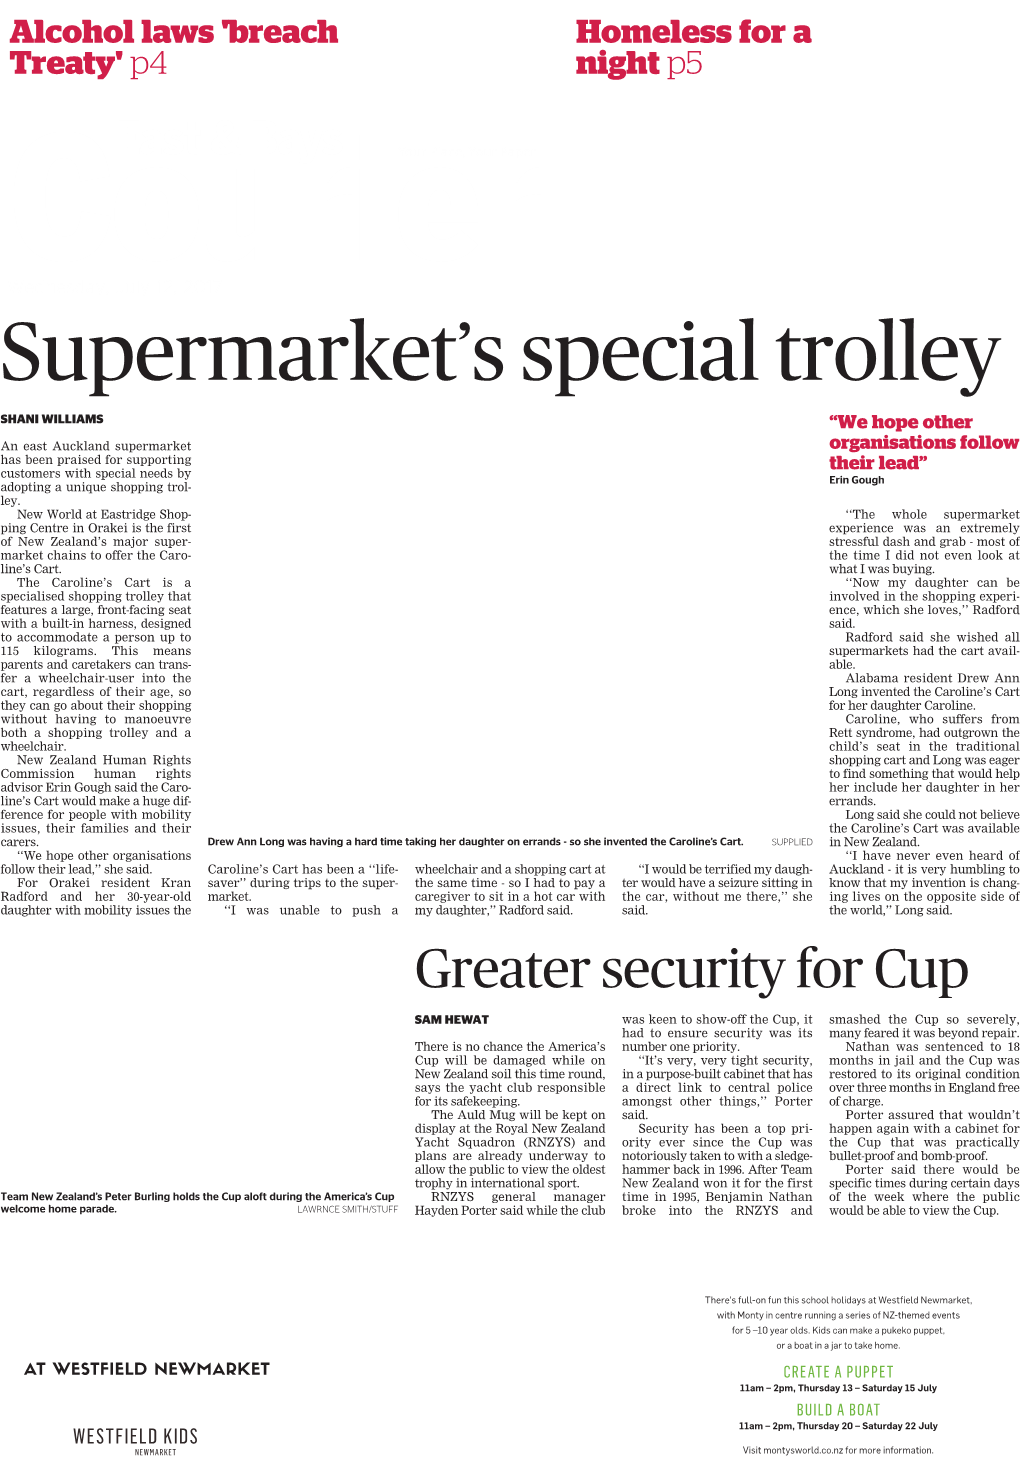 Supermarket's Special Trolley